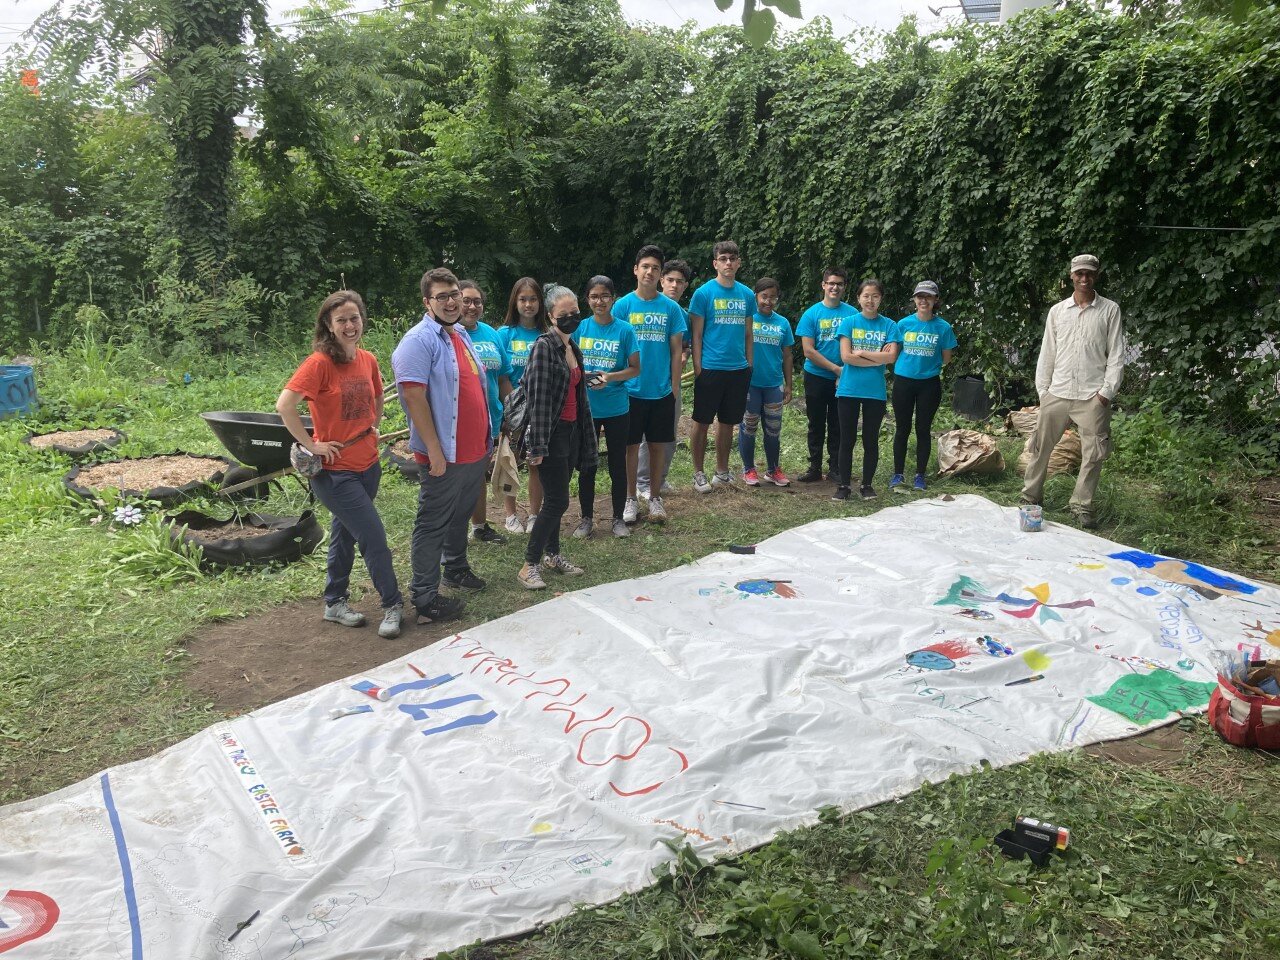  On Monday, we went to the Secret Garden, part of Eastie Farm. Although it was muddy, we did a lot of hard work and painted to share a message with the public about climate change, greenhouse gases, and air pollution. ~Nailyn 